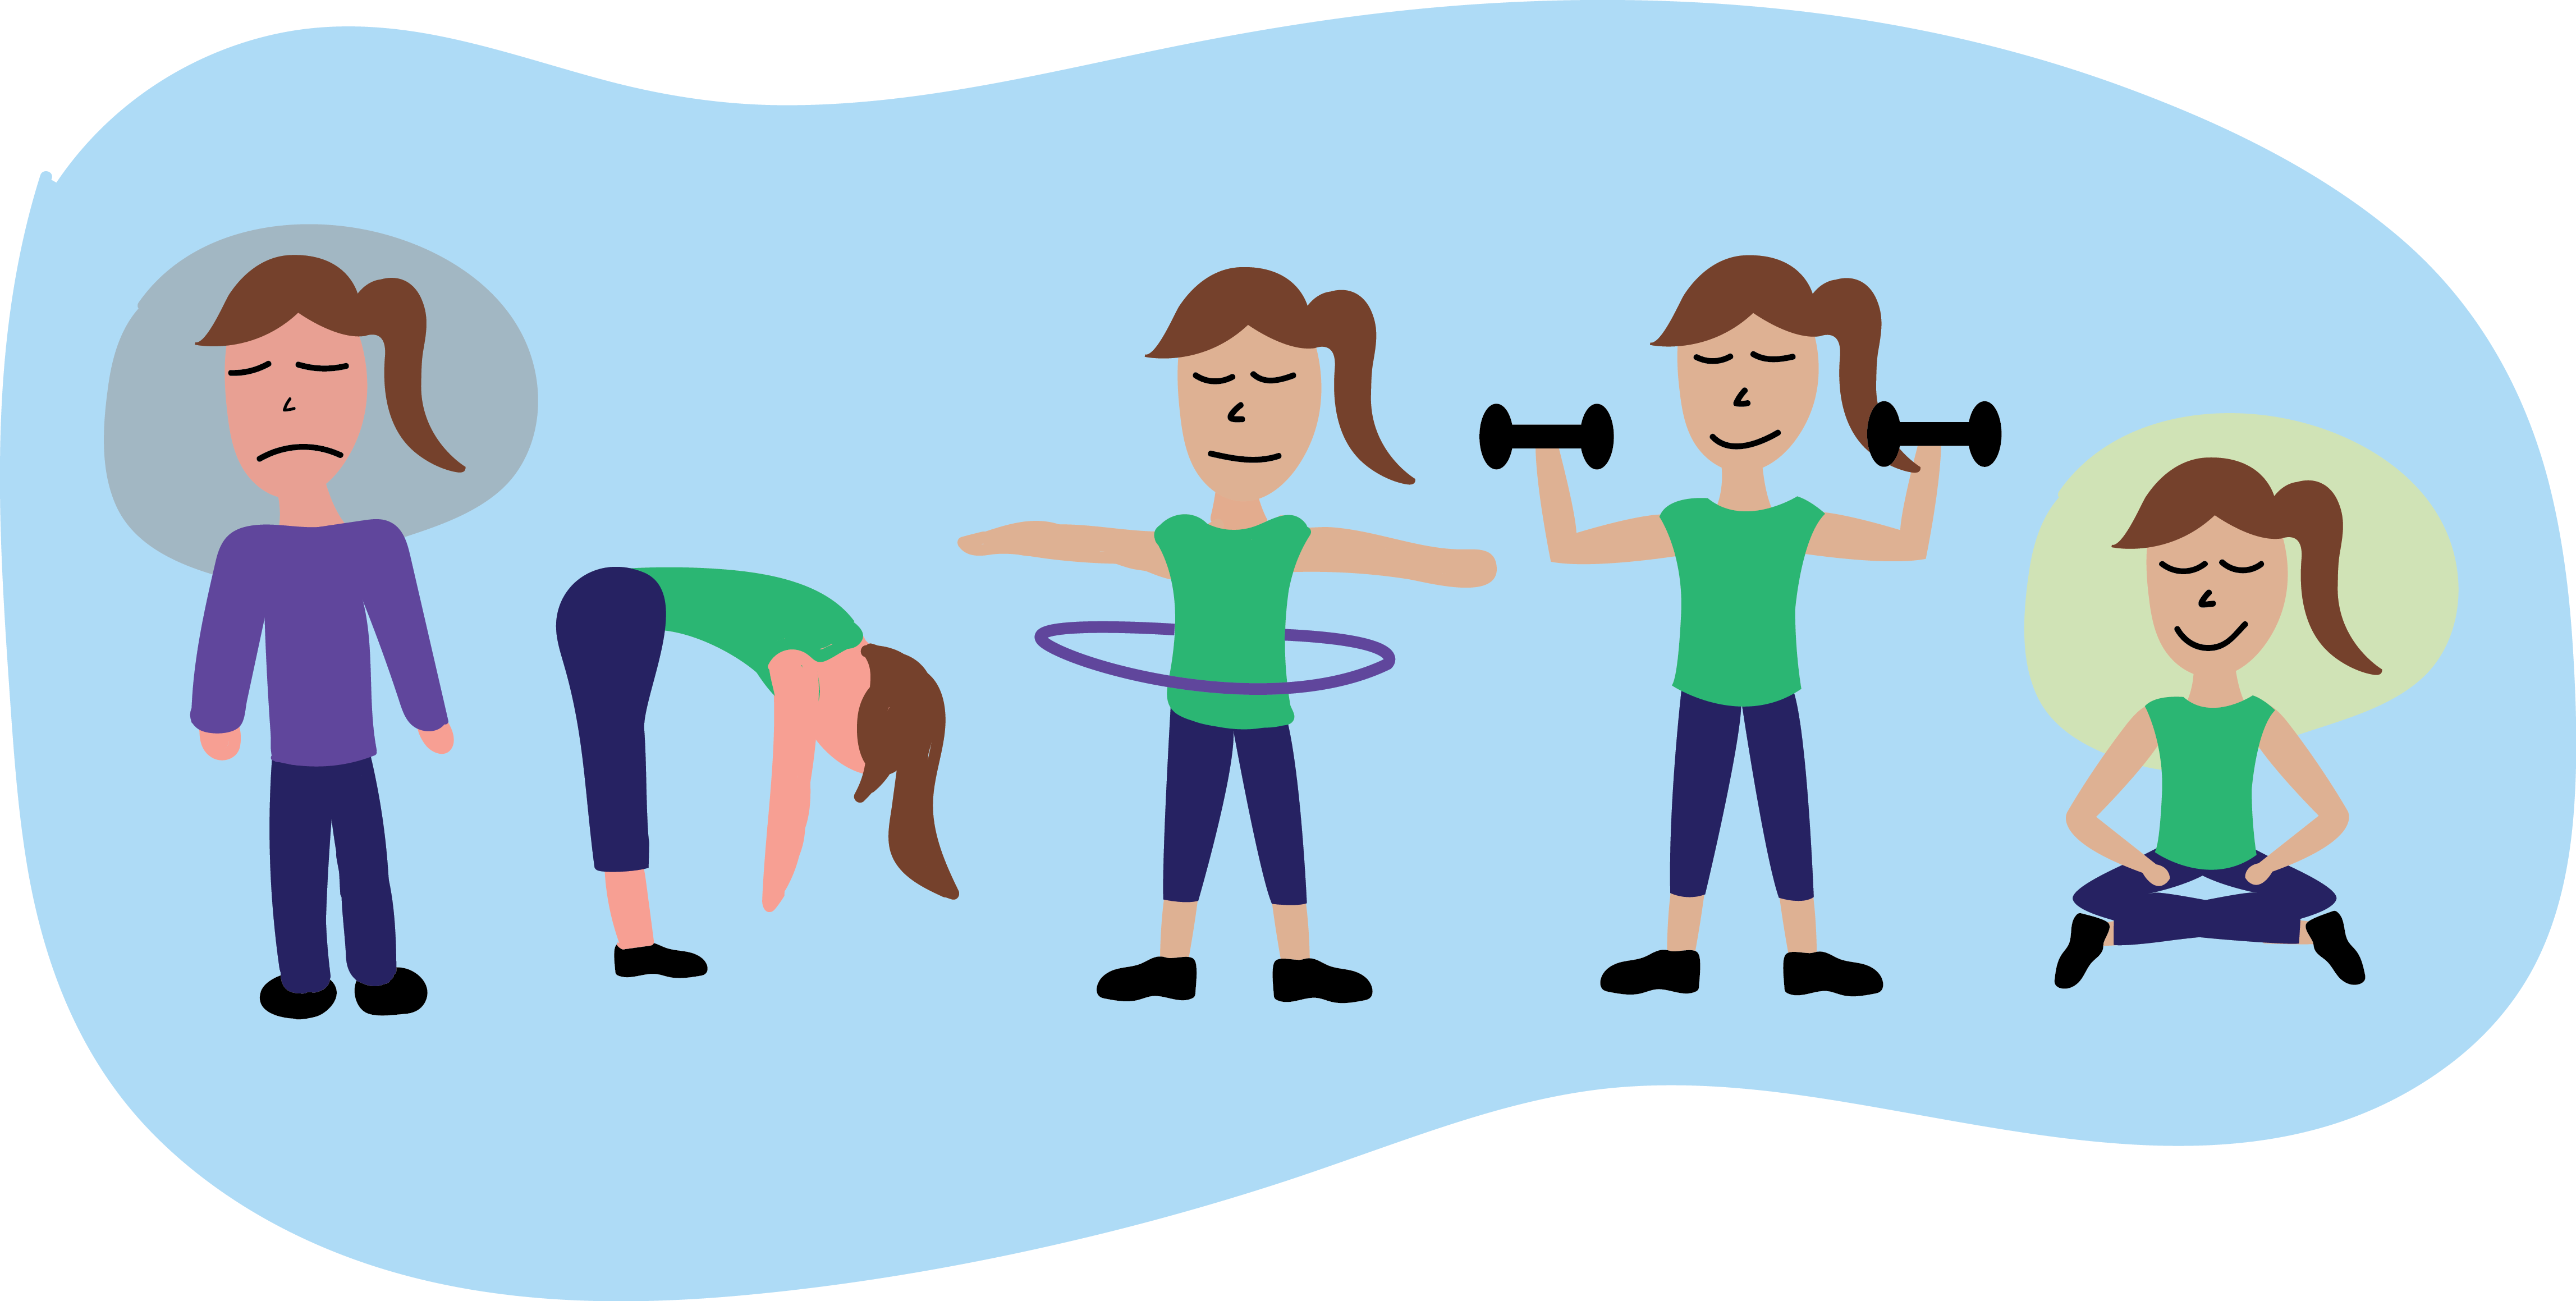 Health archives emerald media. Exercising clipart group exercise